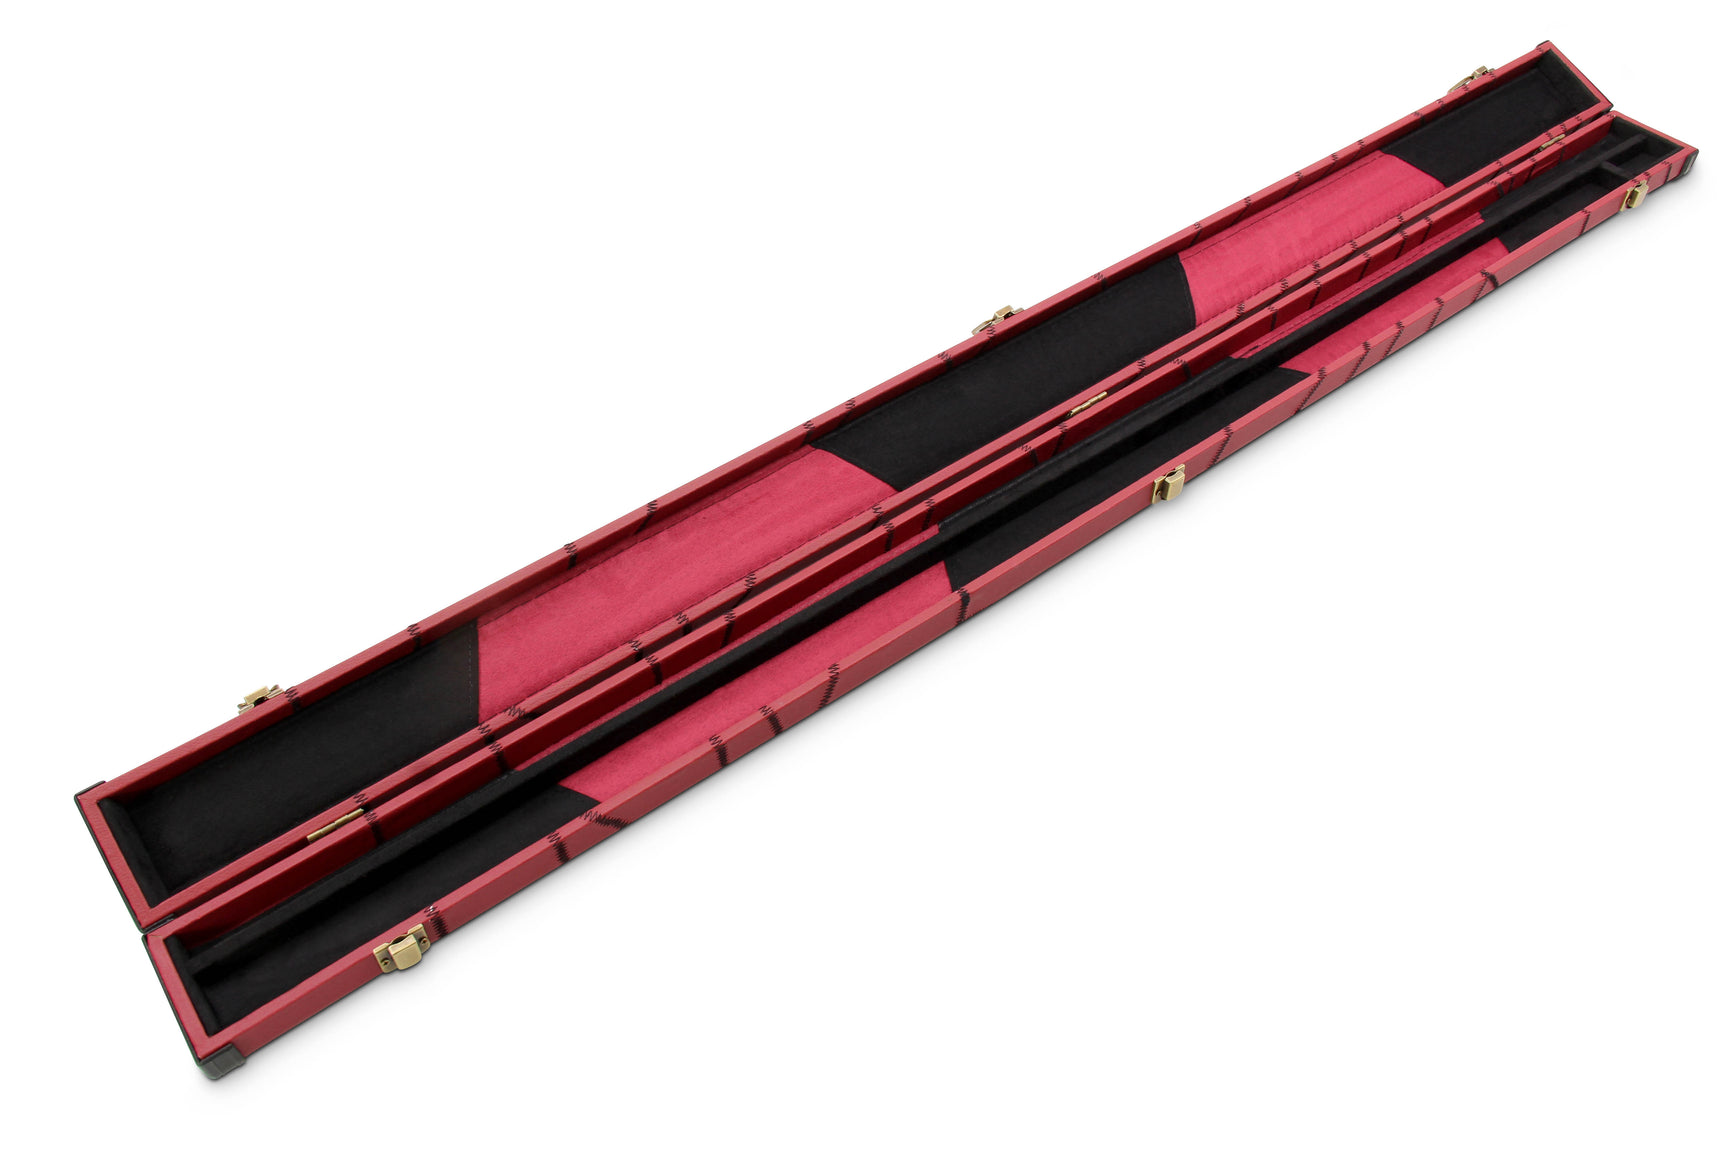 Deluxe 3/4 Snooker Pool Cue Case with Plastic Ends - CRAZY STITCH Design